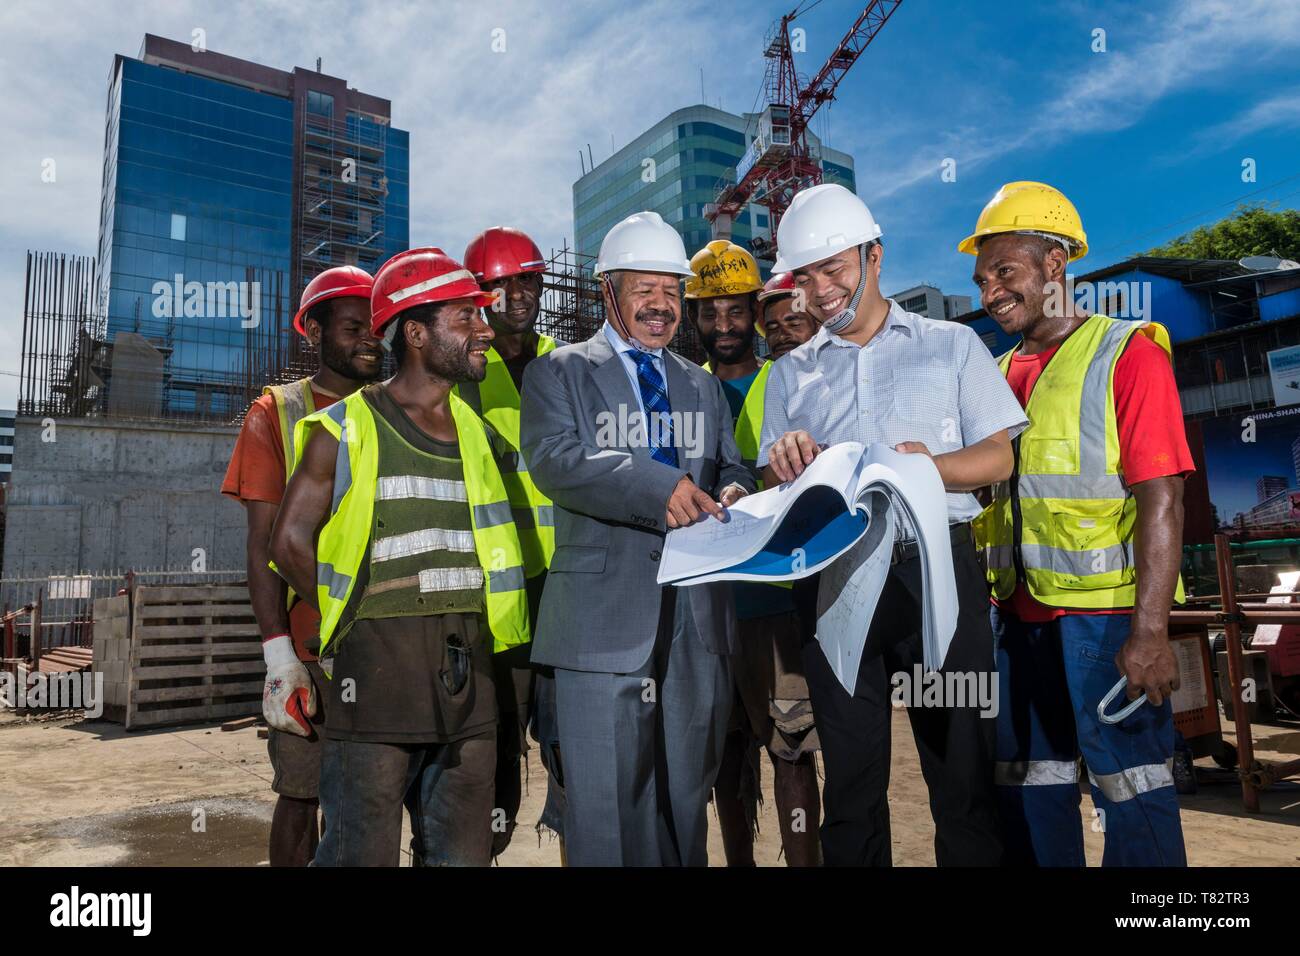 Papua New Guinea, National Capital District, Port Moresby, Town, Downtown District, Governor of Port Moresby, Powes Parkop visiting a construction site Stock Photo